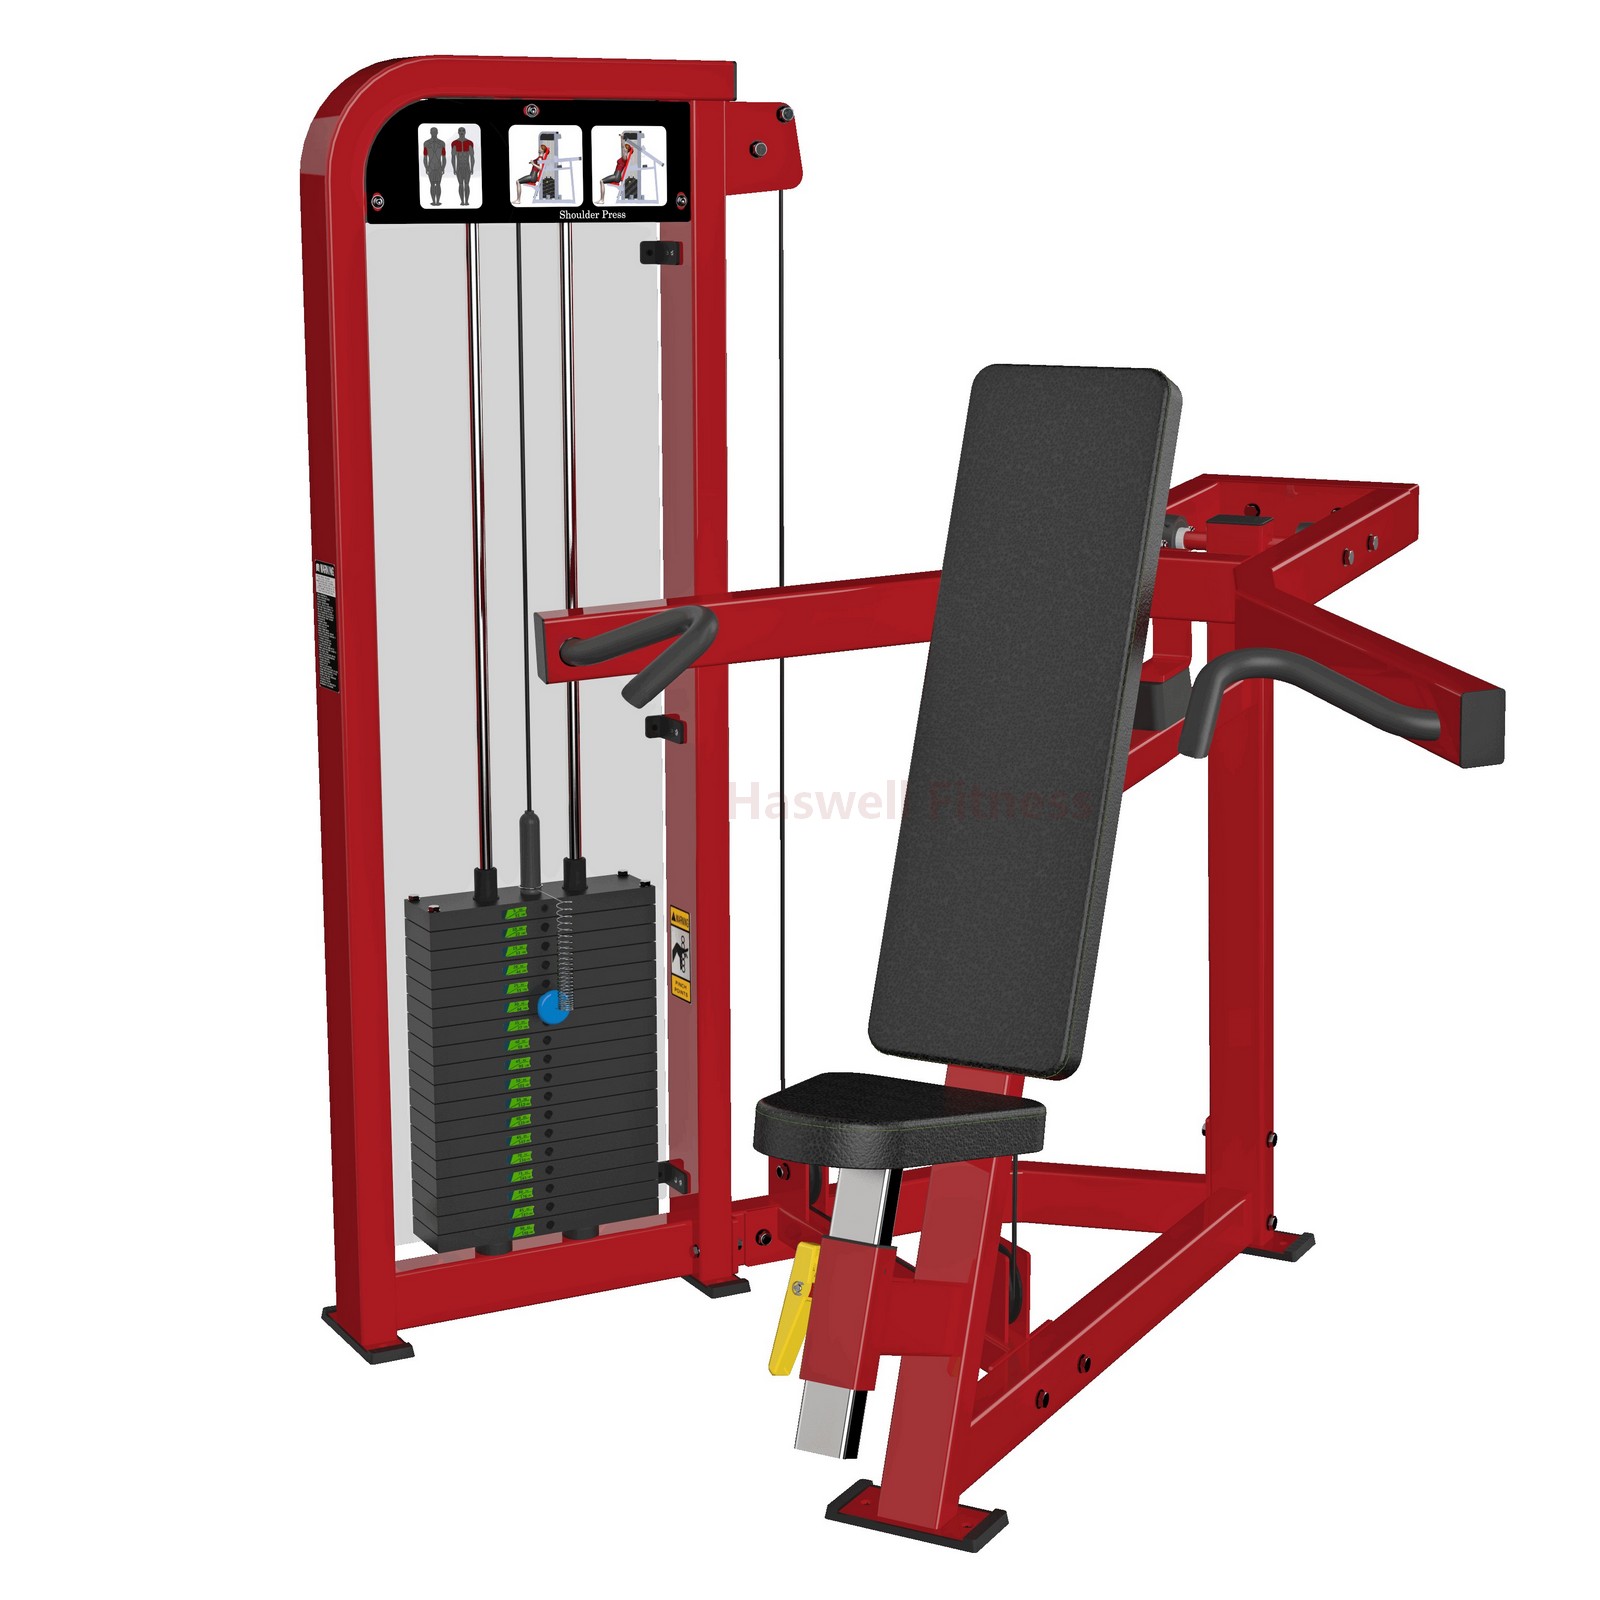 NH-111-1A Shoulder Press gym machine from China Haswell